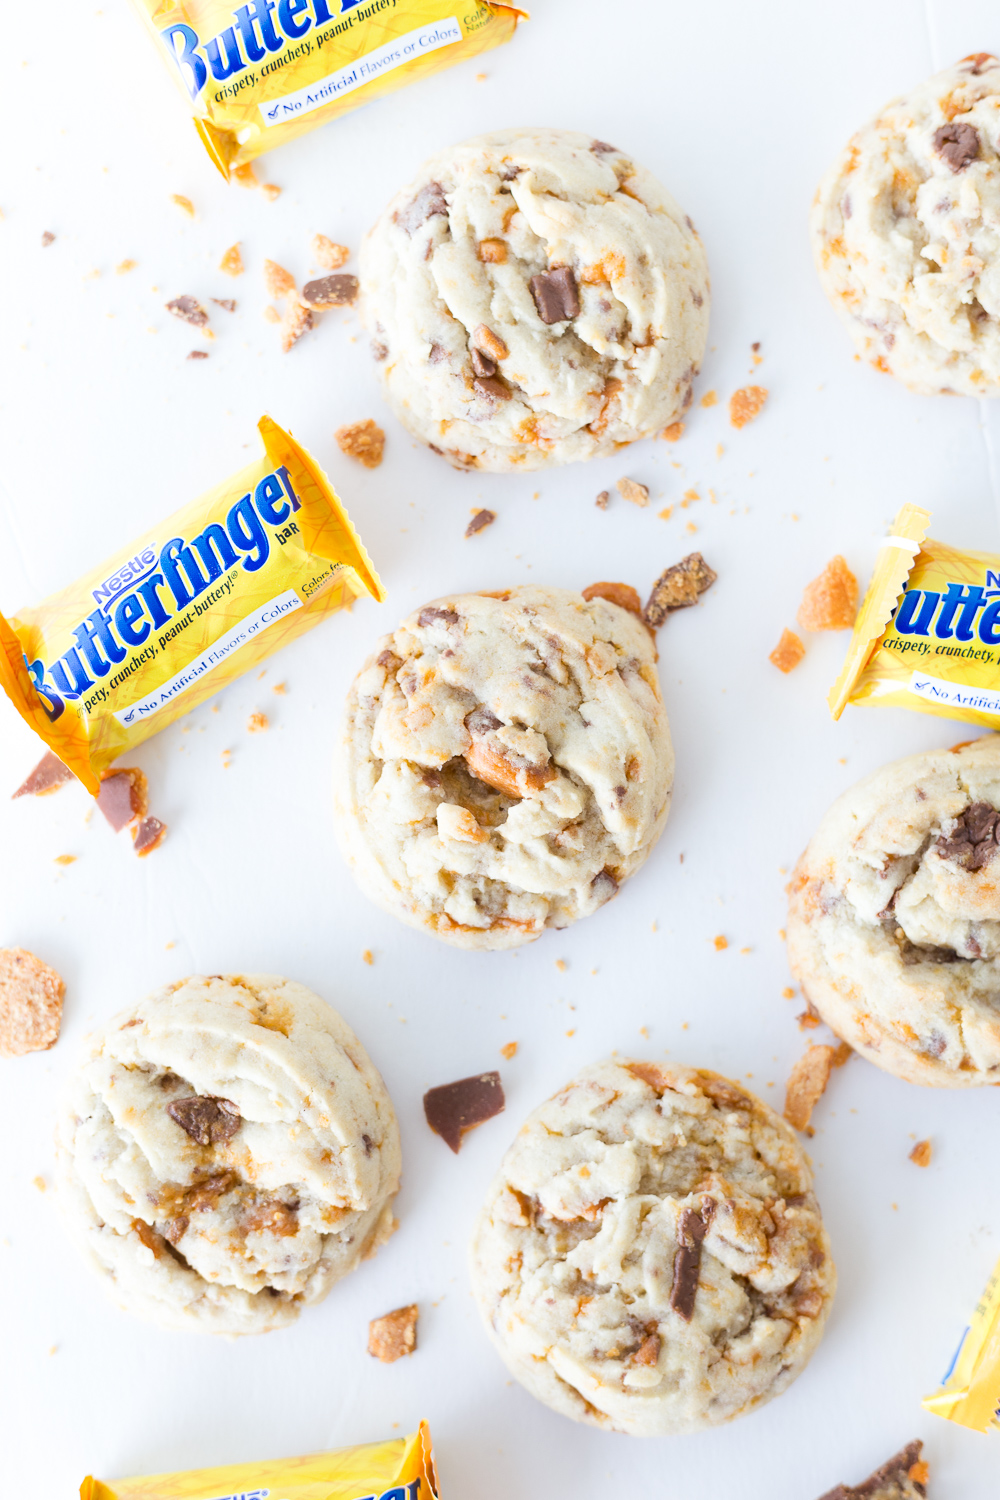 These Butterfinger cookies are soft, flavorful and delicious! They have a sweet taste and are filled with crunchy candy pieces! They are perfect for a Boo Basket. www.madetobeamomma.com